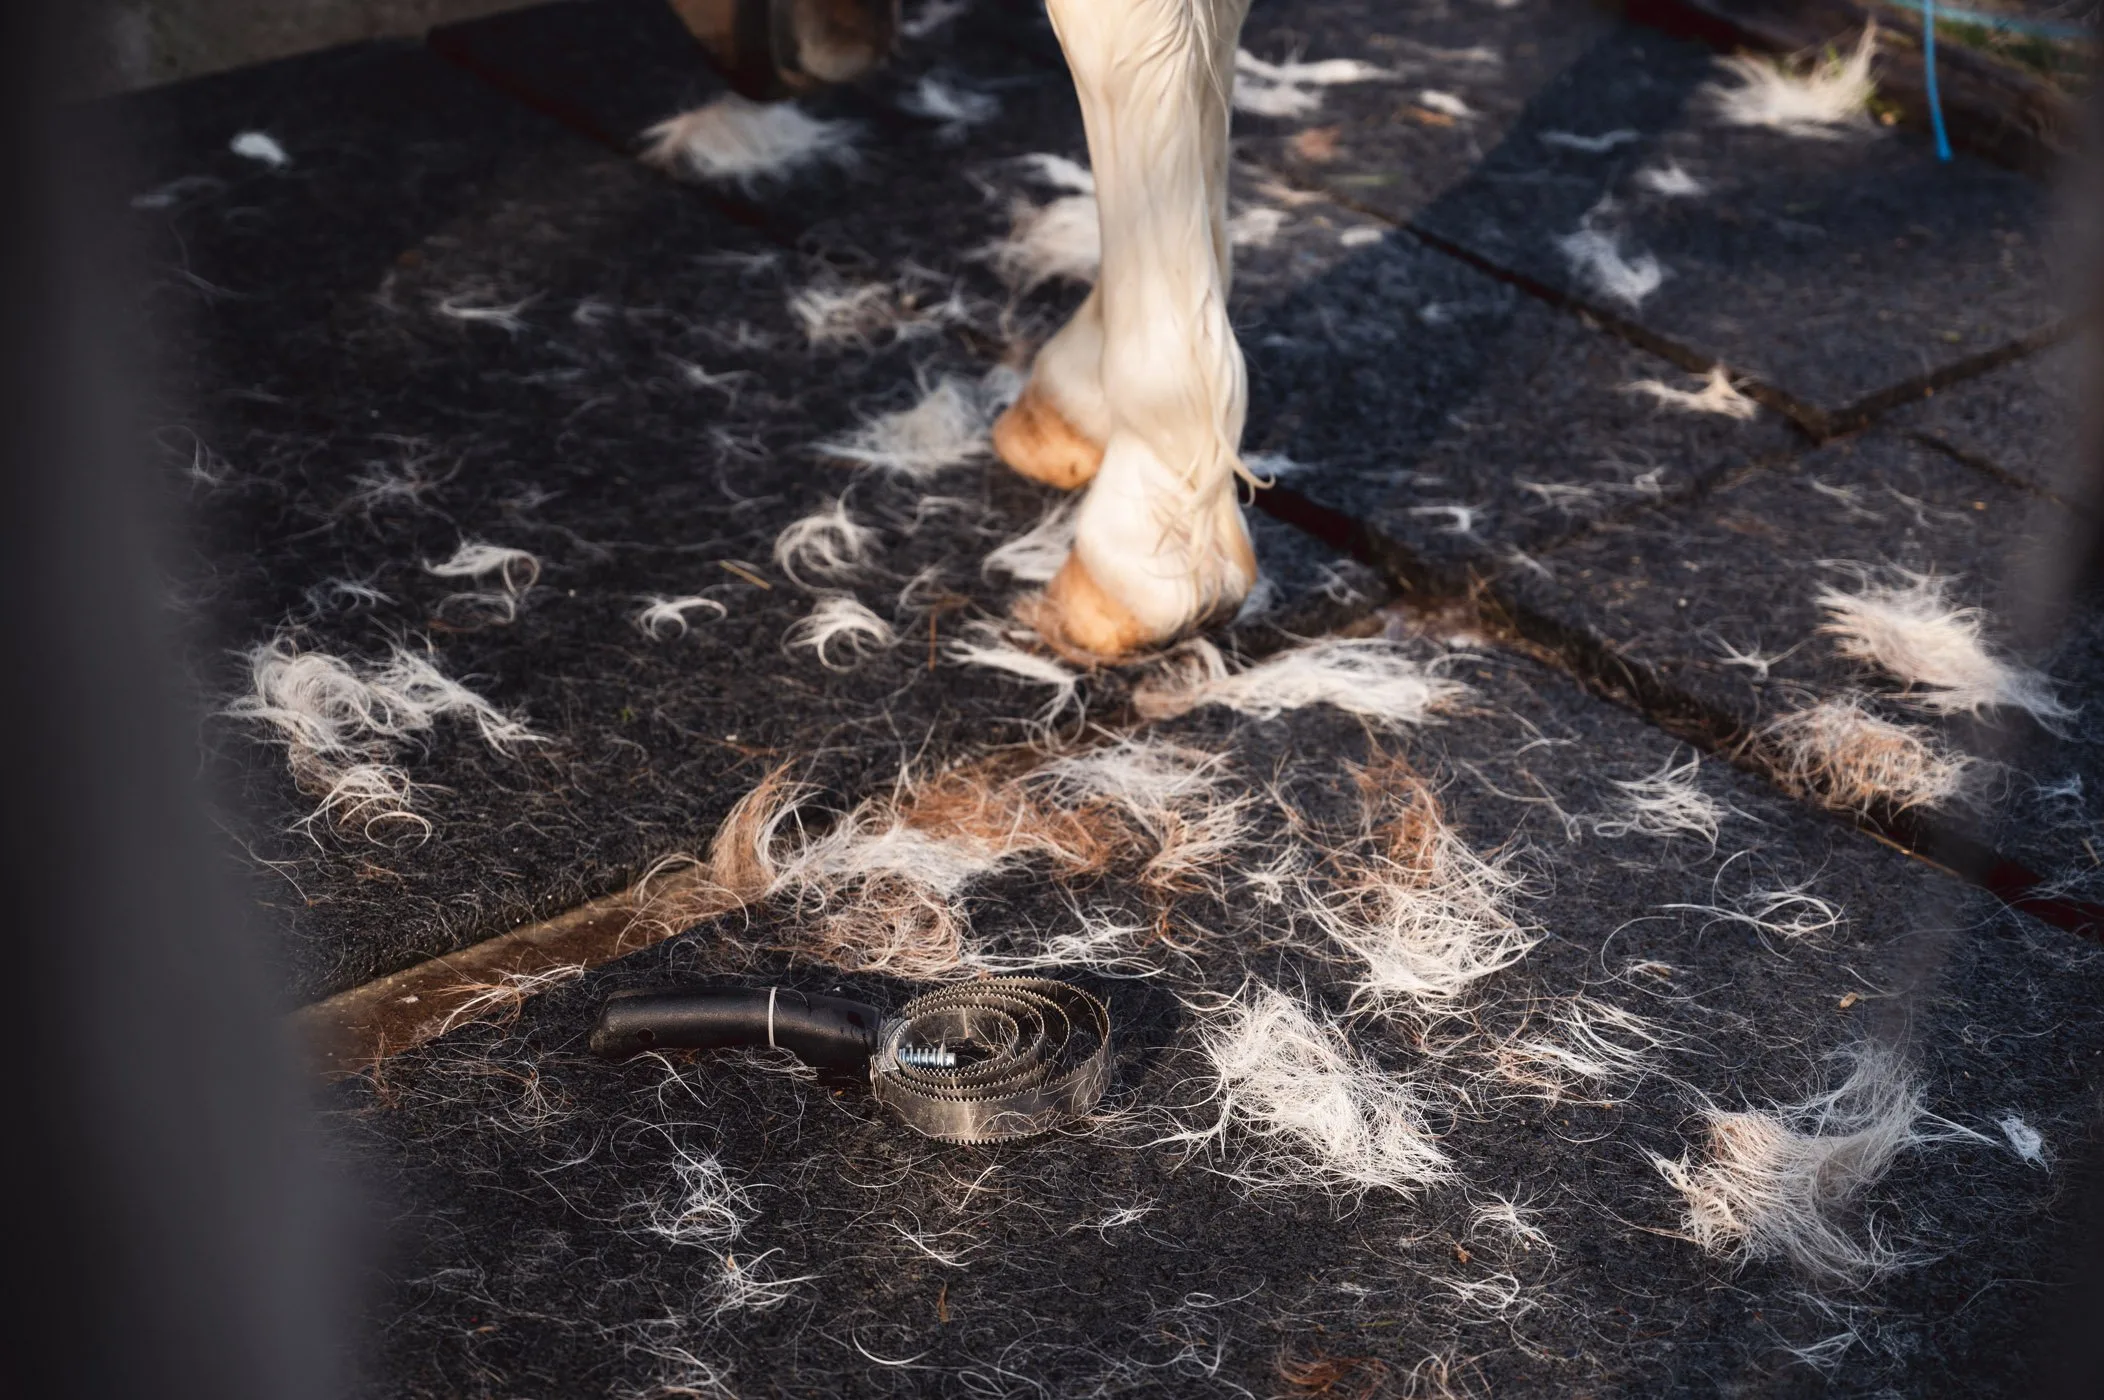 Horse shedding tool and lots of animals hair on stable floor next to pony's legs.